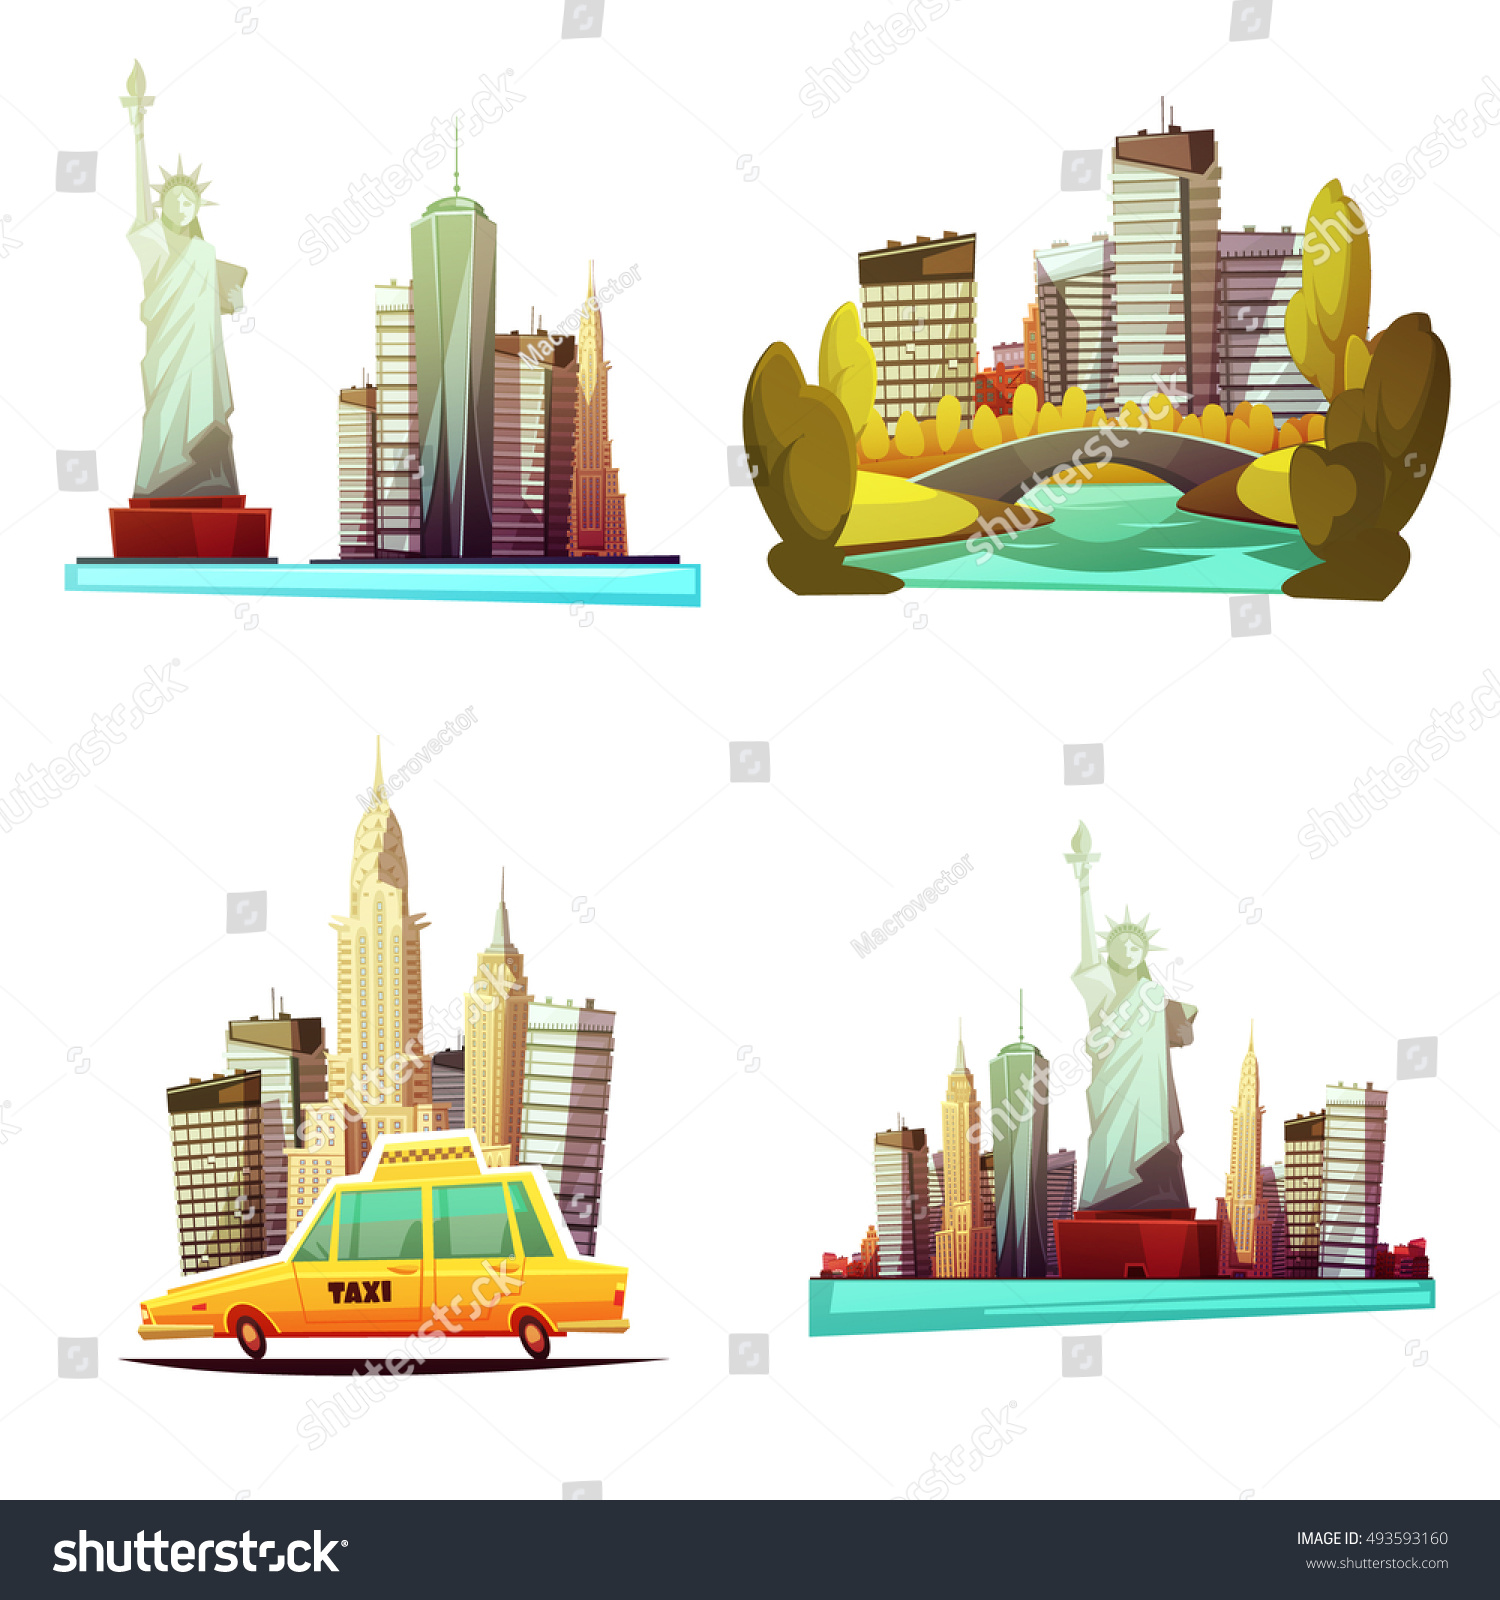 SVG of New york downtown 2x2 cartoon compositions with skylines statue of liberty yellow cab central park elements flat vector illustration    svg